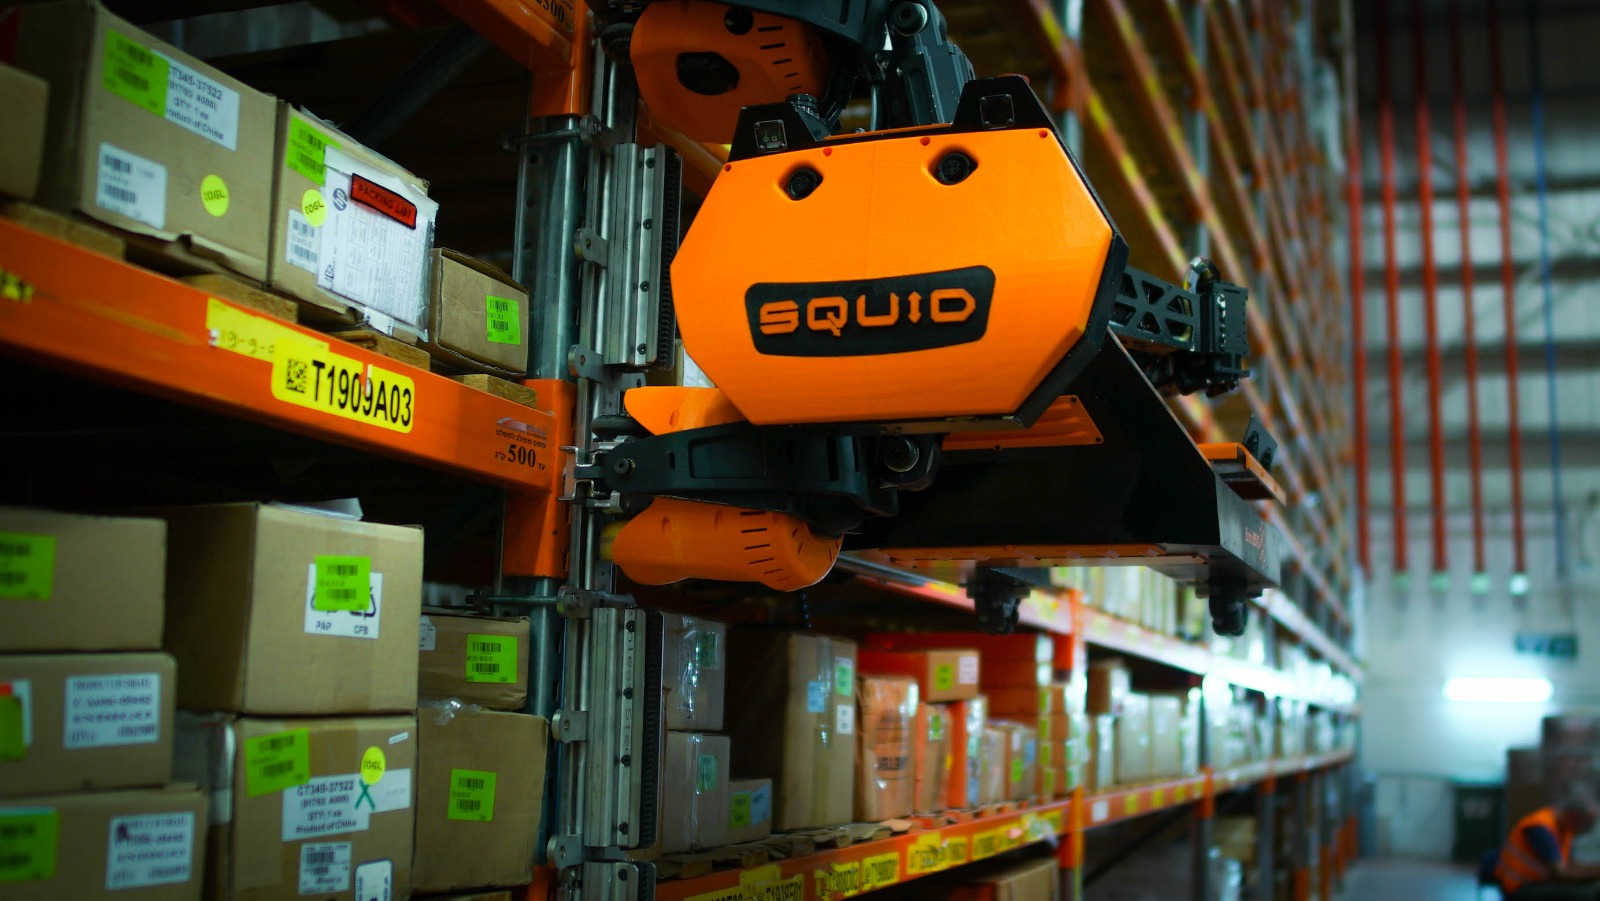 BionicHIVE’s robot works autonomously to pick, sort and replenish stock in warehouses. Photo courtesy of BionicHIVE